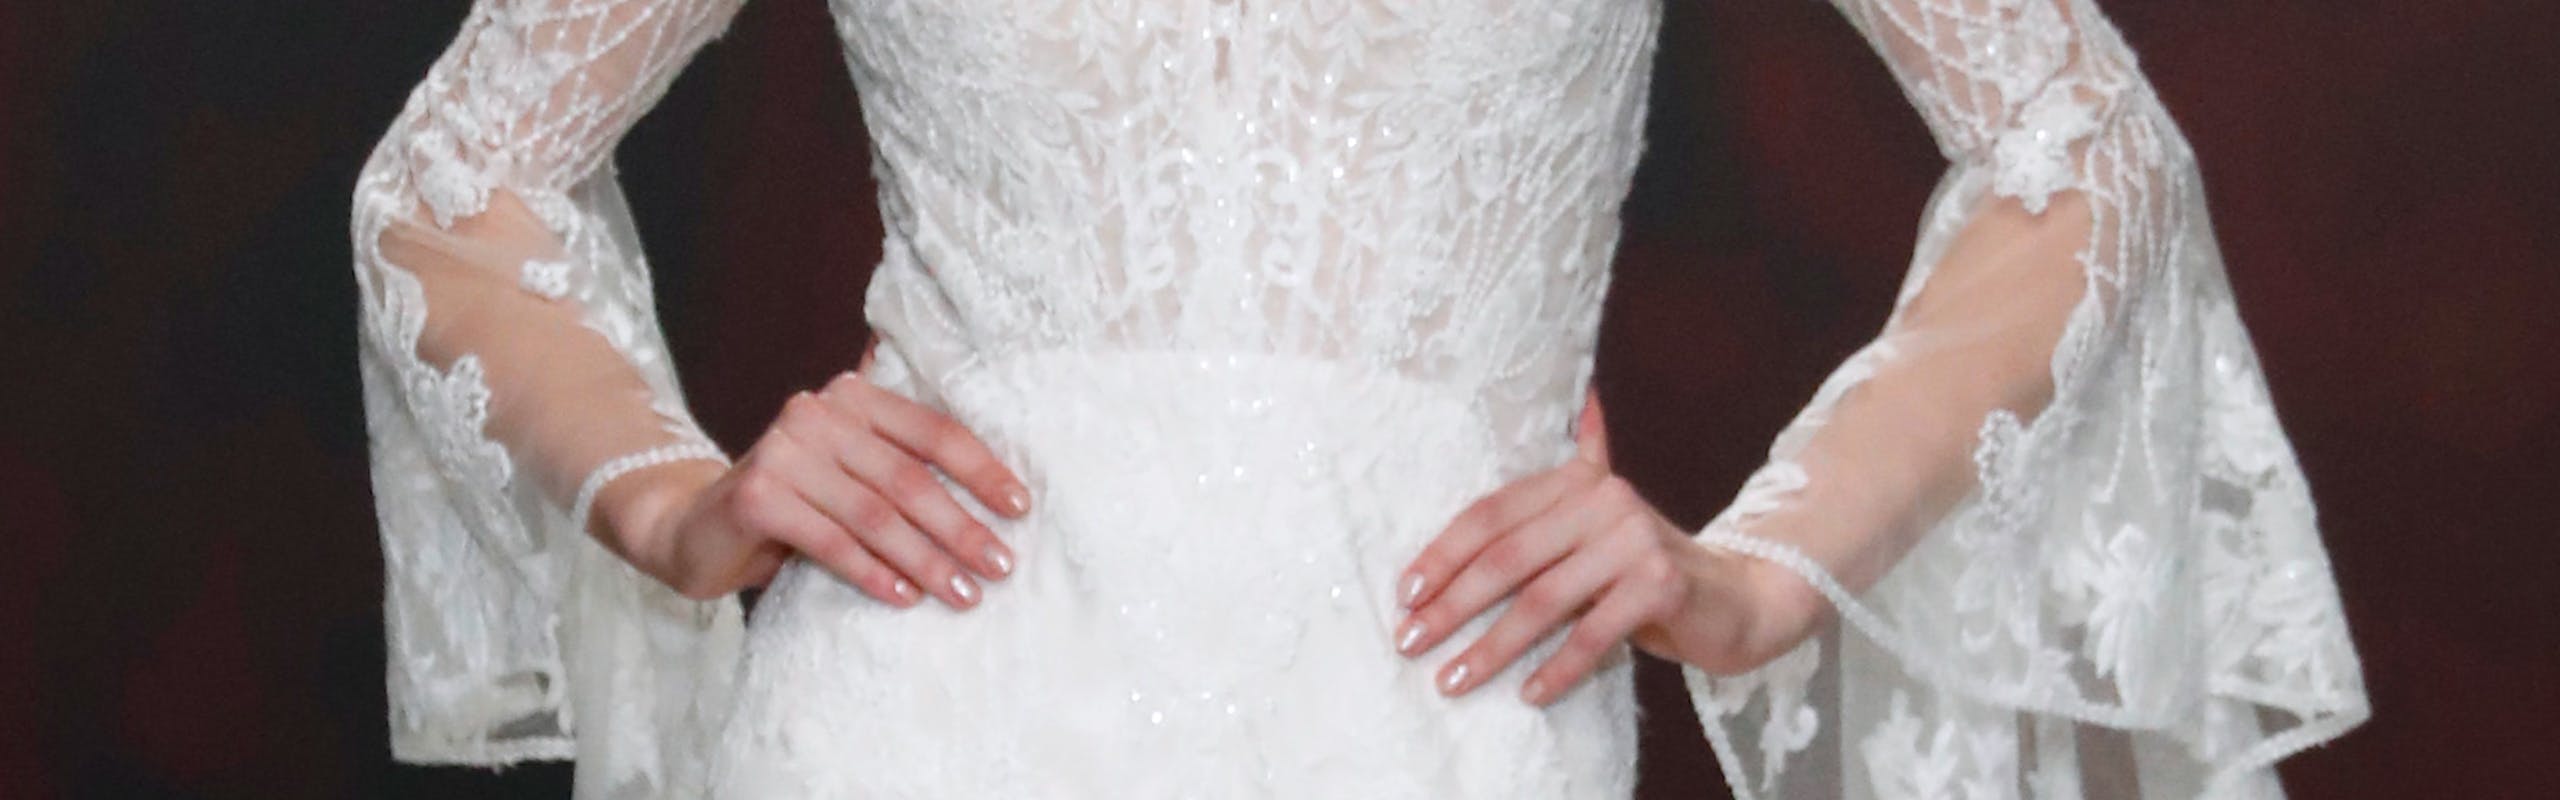 Wedding nails for a bride, white couture bridal gown.